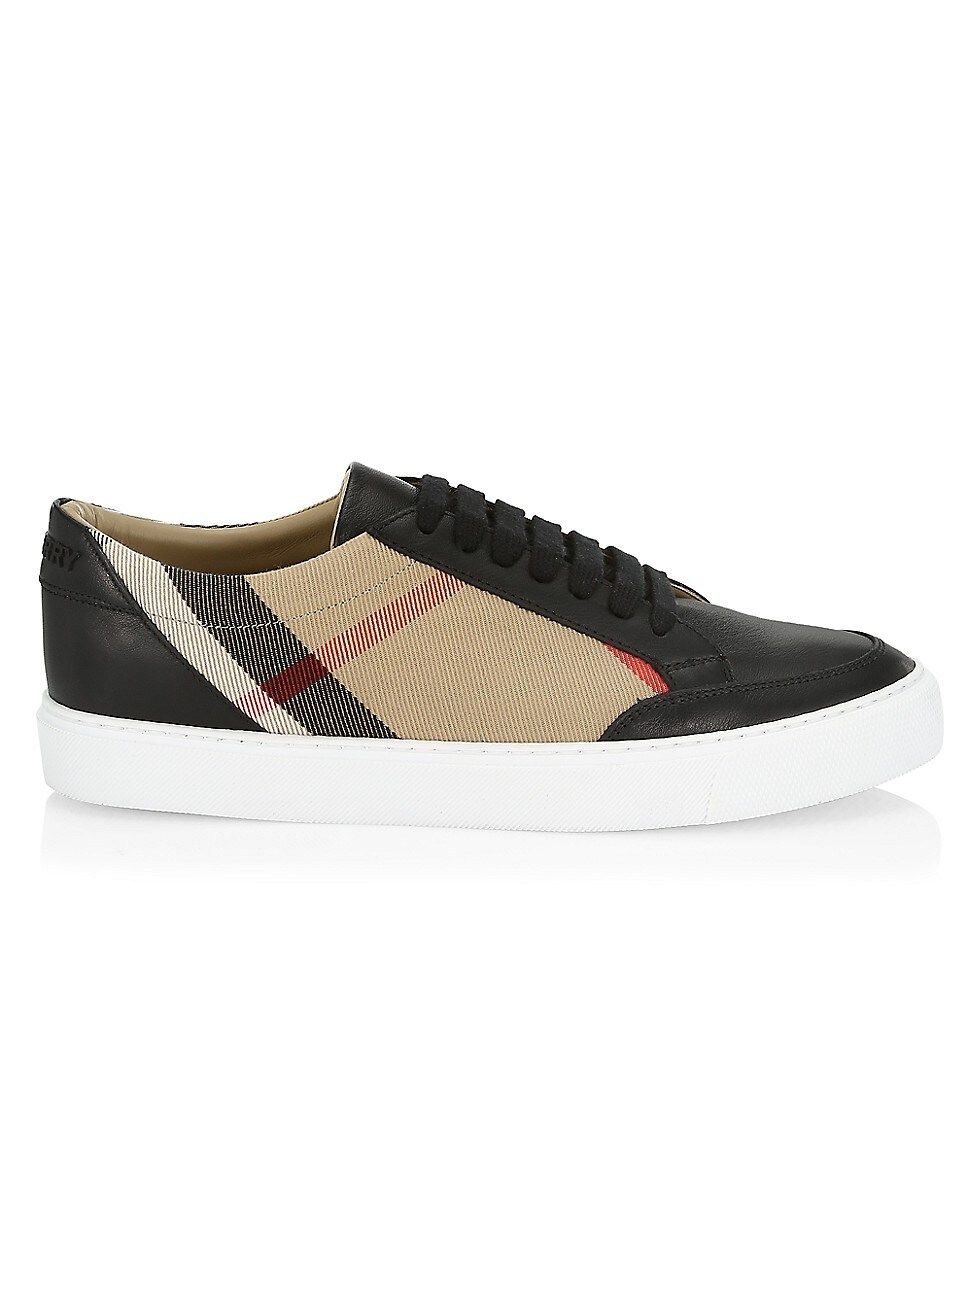 Burberry Women's New Salmond Vintage Check Sneakers - New Black - Size 9 | Saks Fifth Avenue